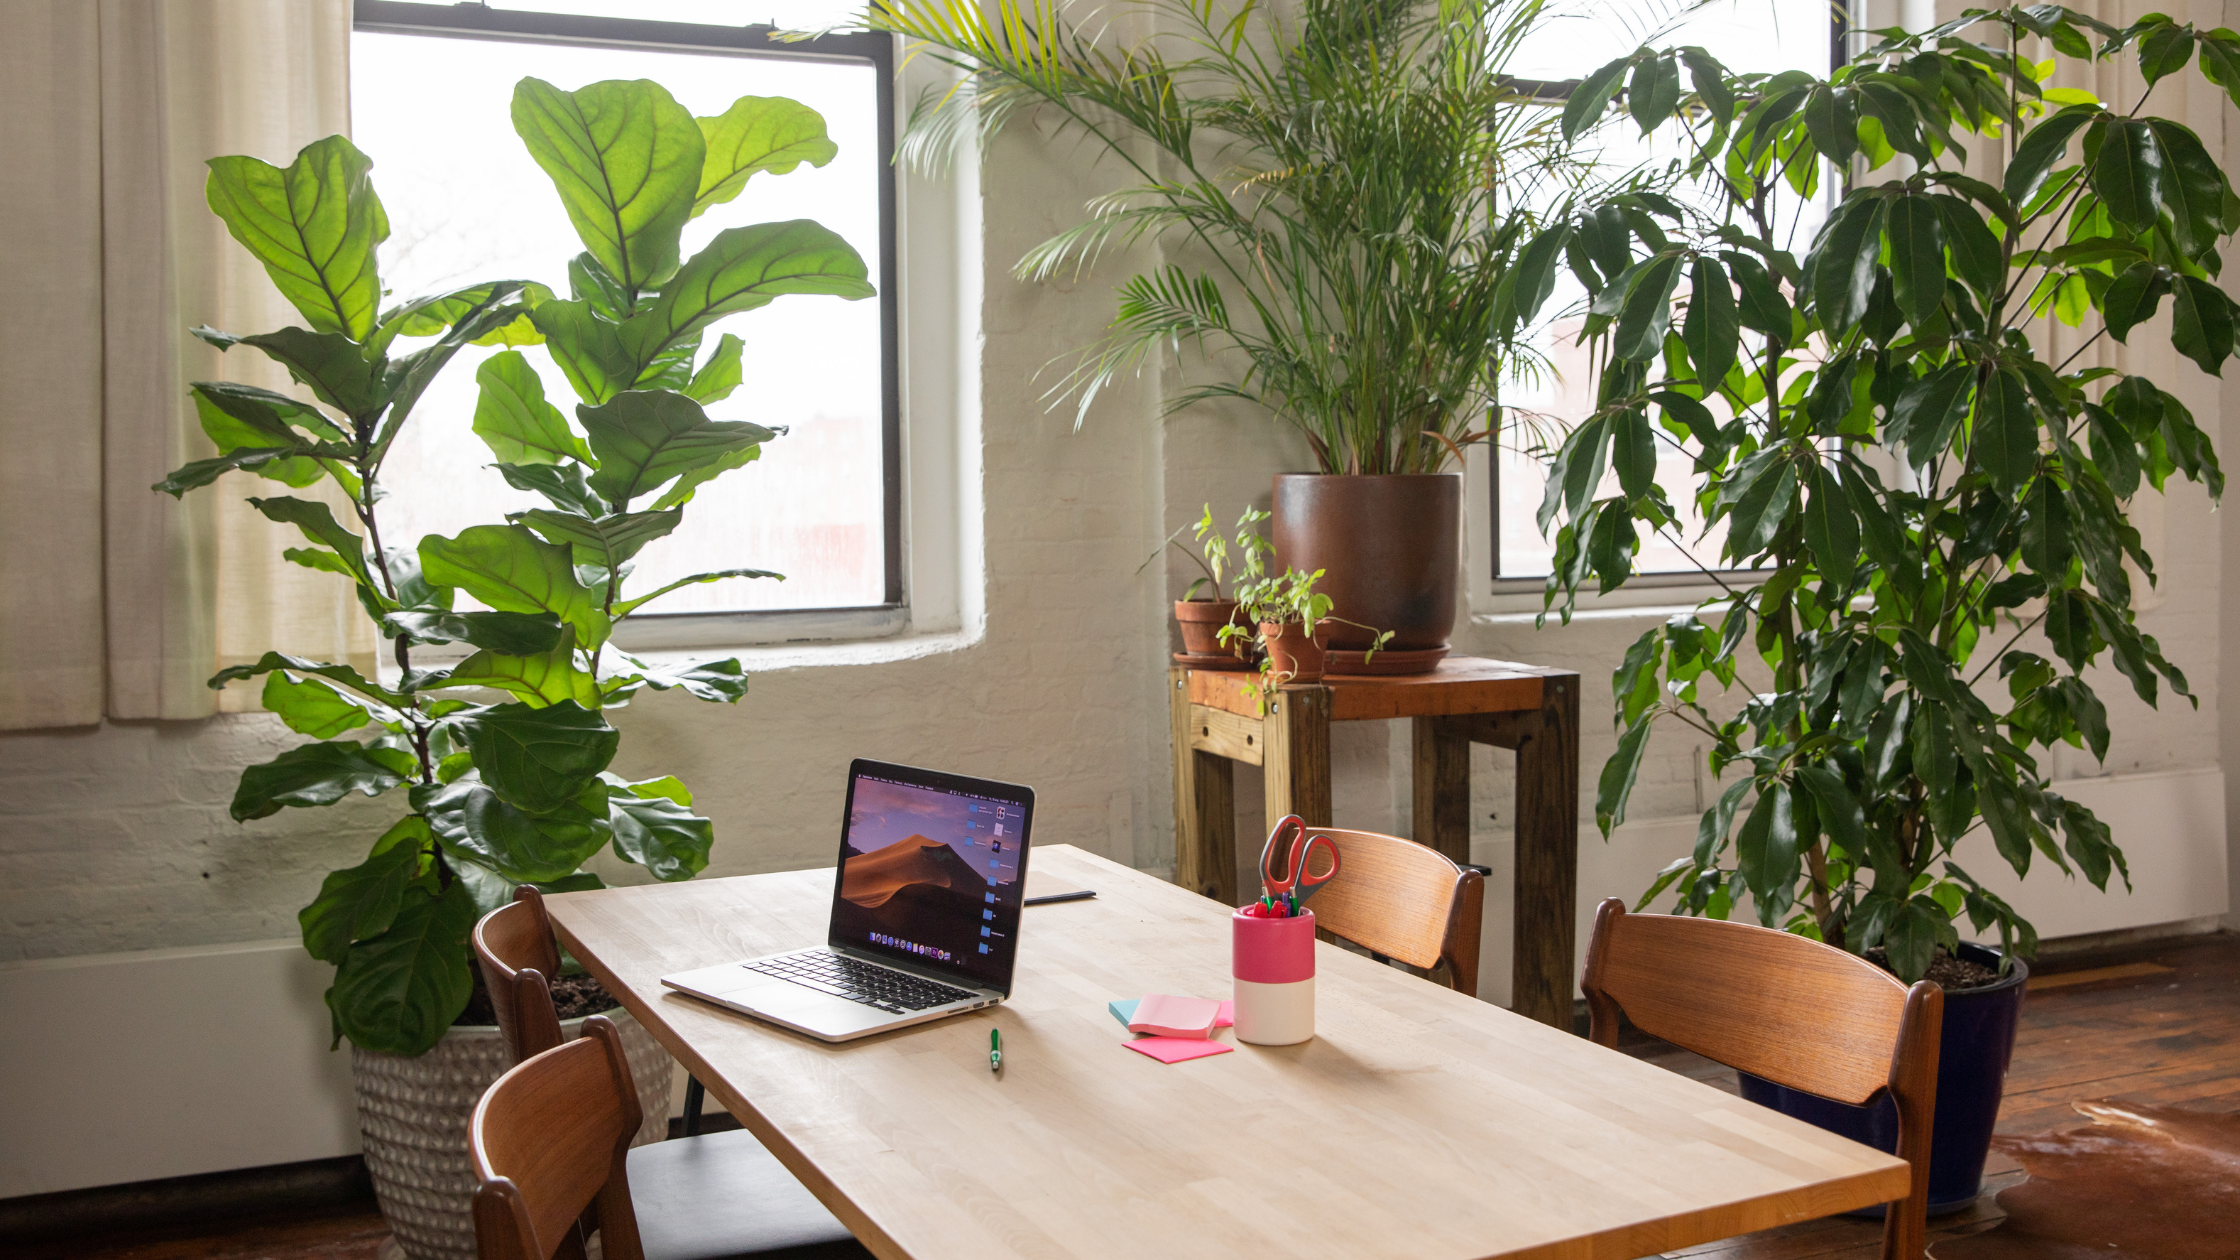 A very green workspace!